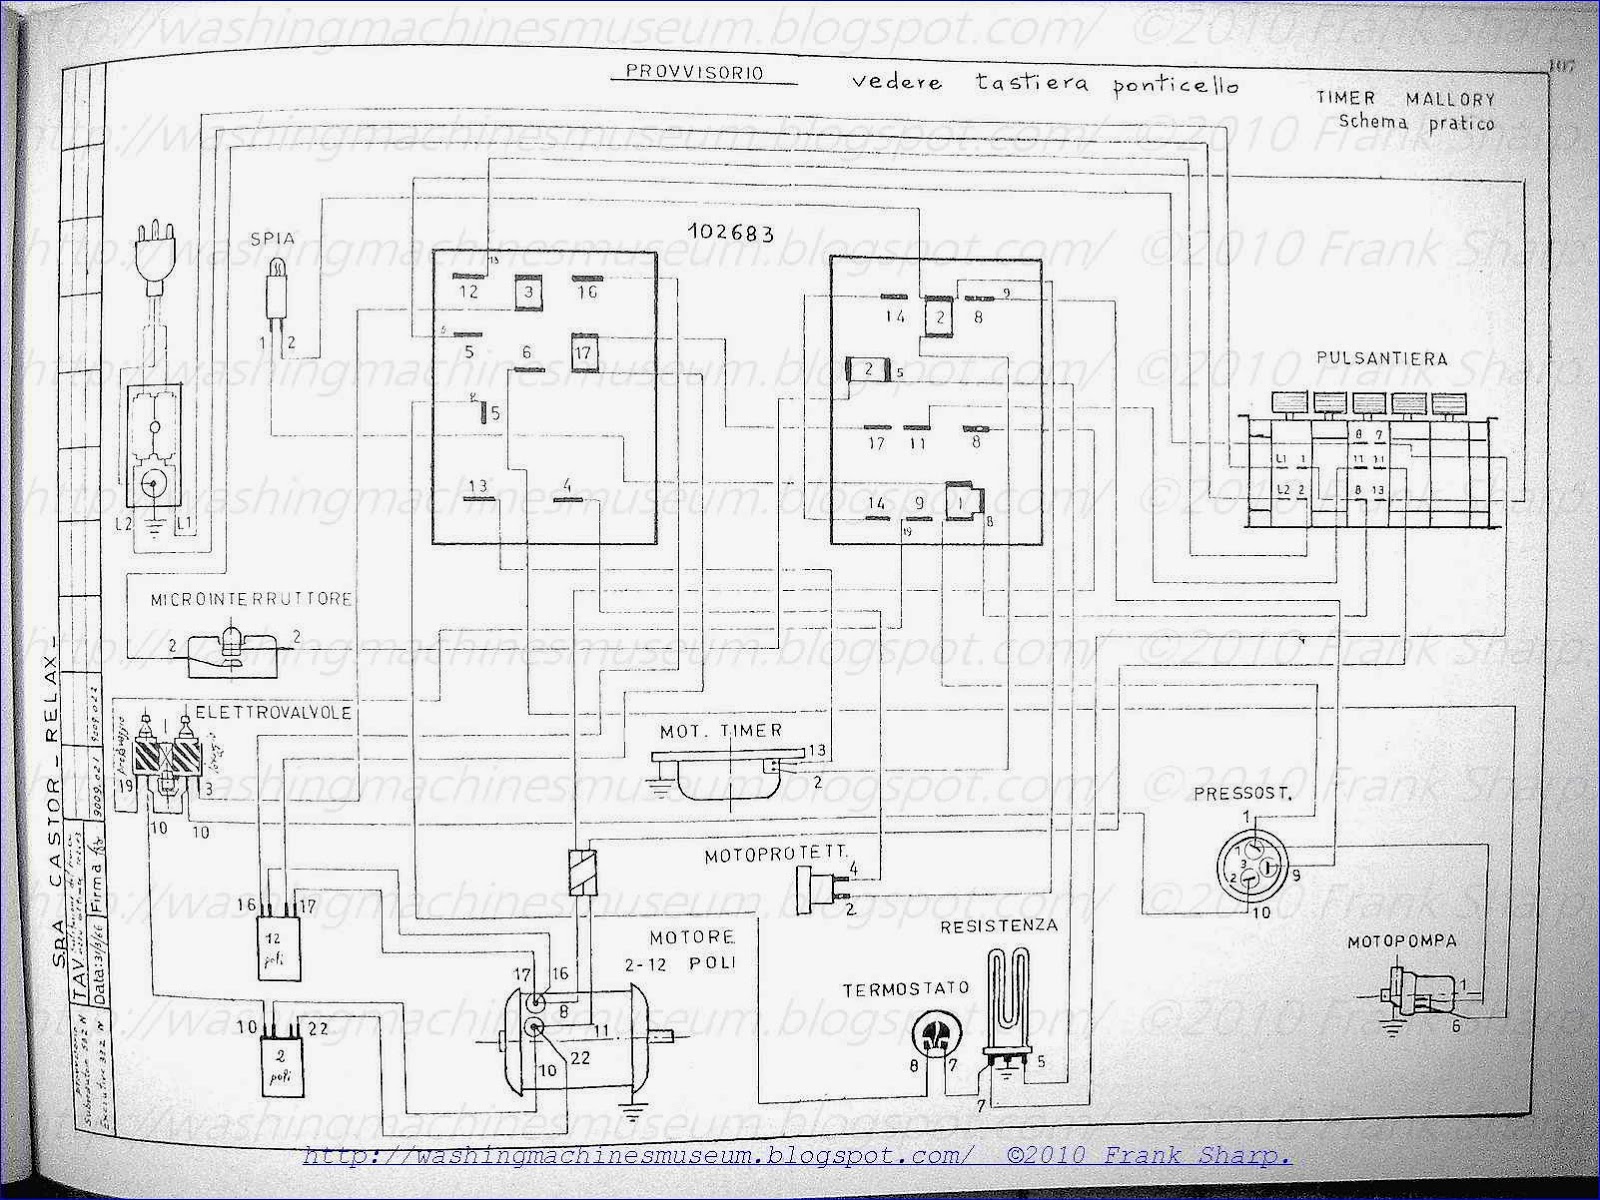 Circuit Diagram Electrolux Washing Machine | Home Made Circuits and